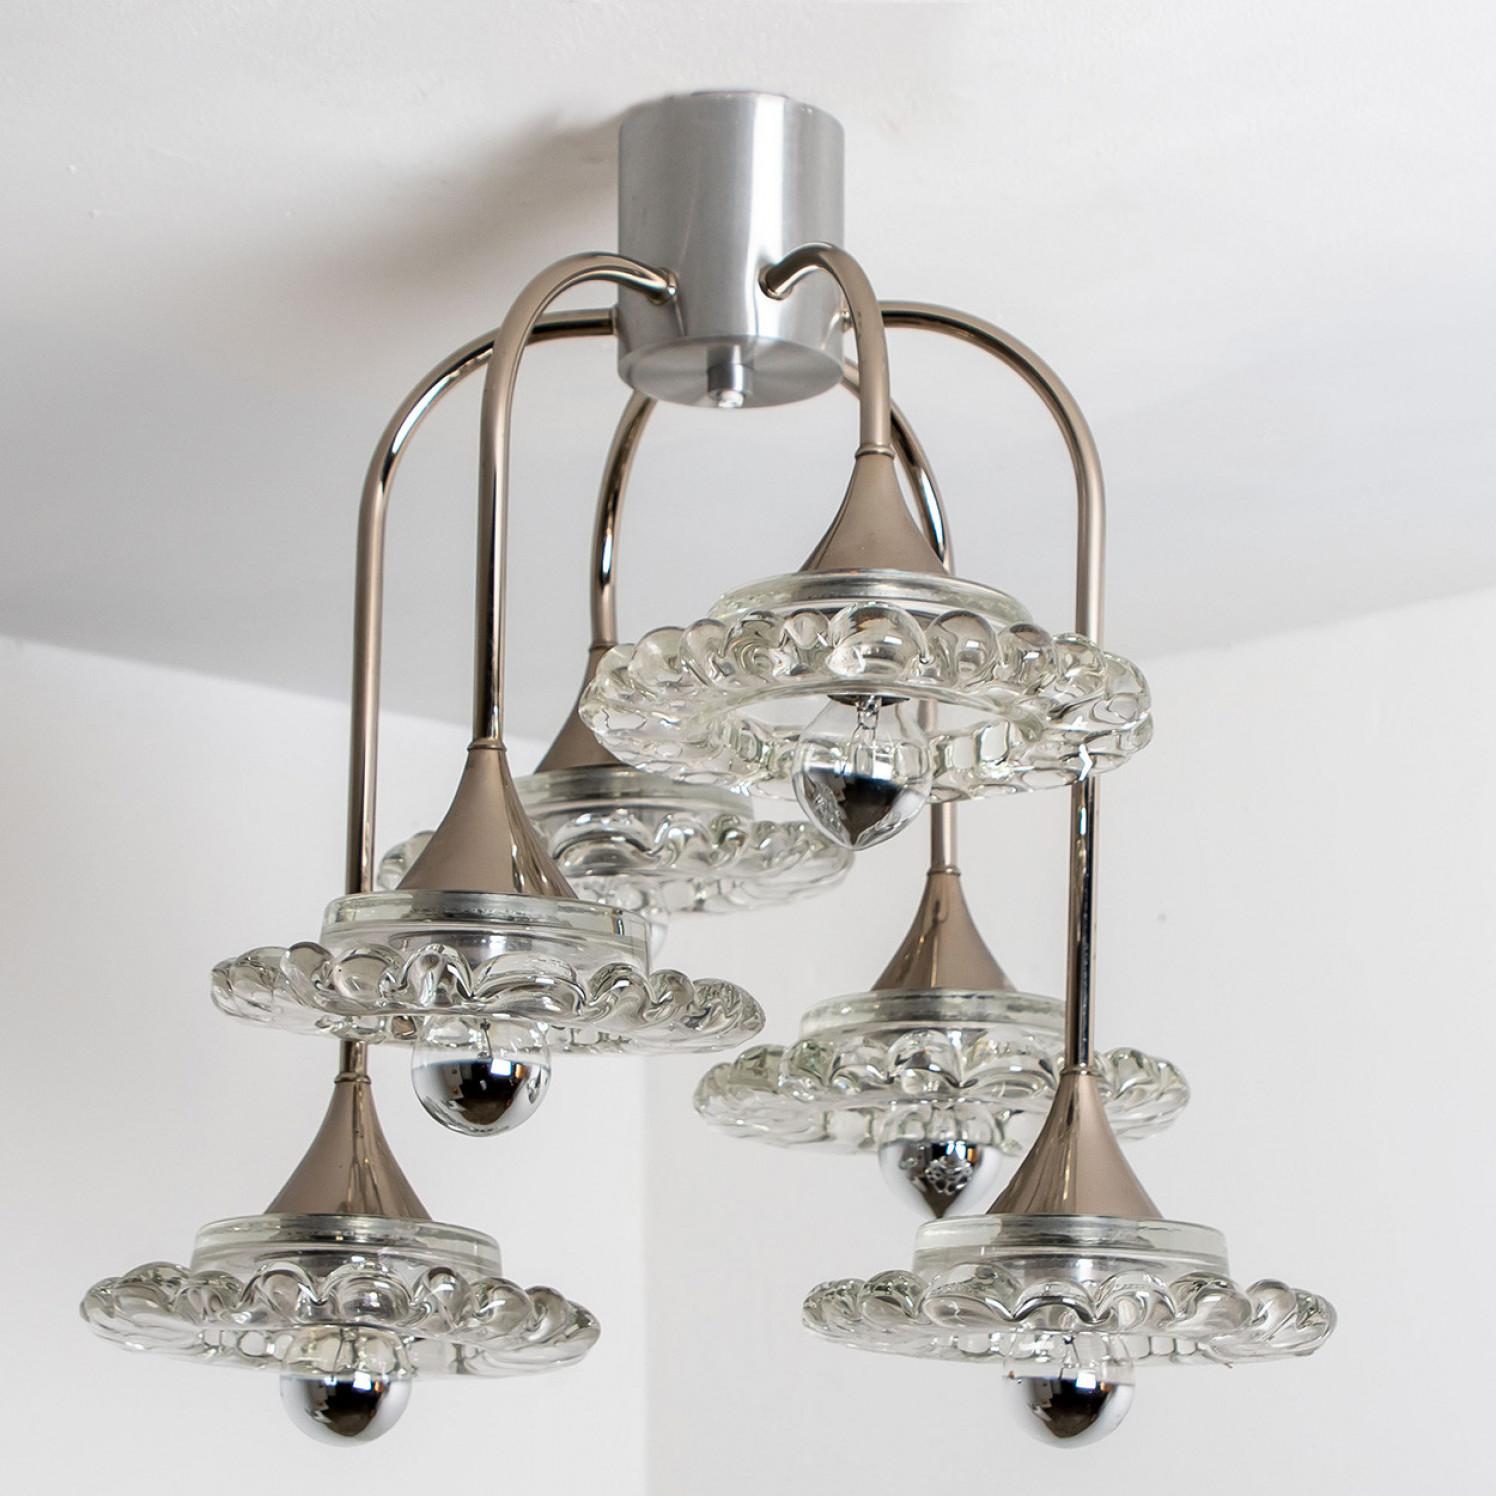 This sweet chandelier is made of thick clear glass and plated chrome. It is manufactured by Hillebrand, Germany around 1960.
The chandelier has six thick glass shades, hanging from a chrome plated base.

Measurements:
Diameter 16.54 inch (42cm) x